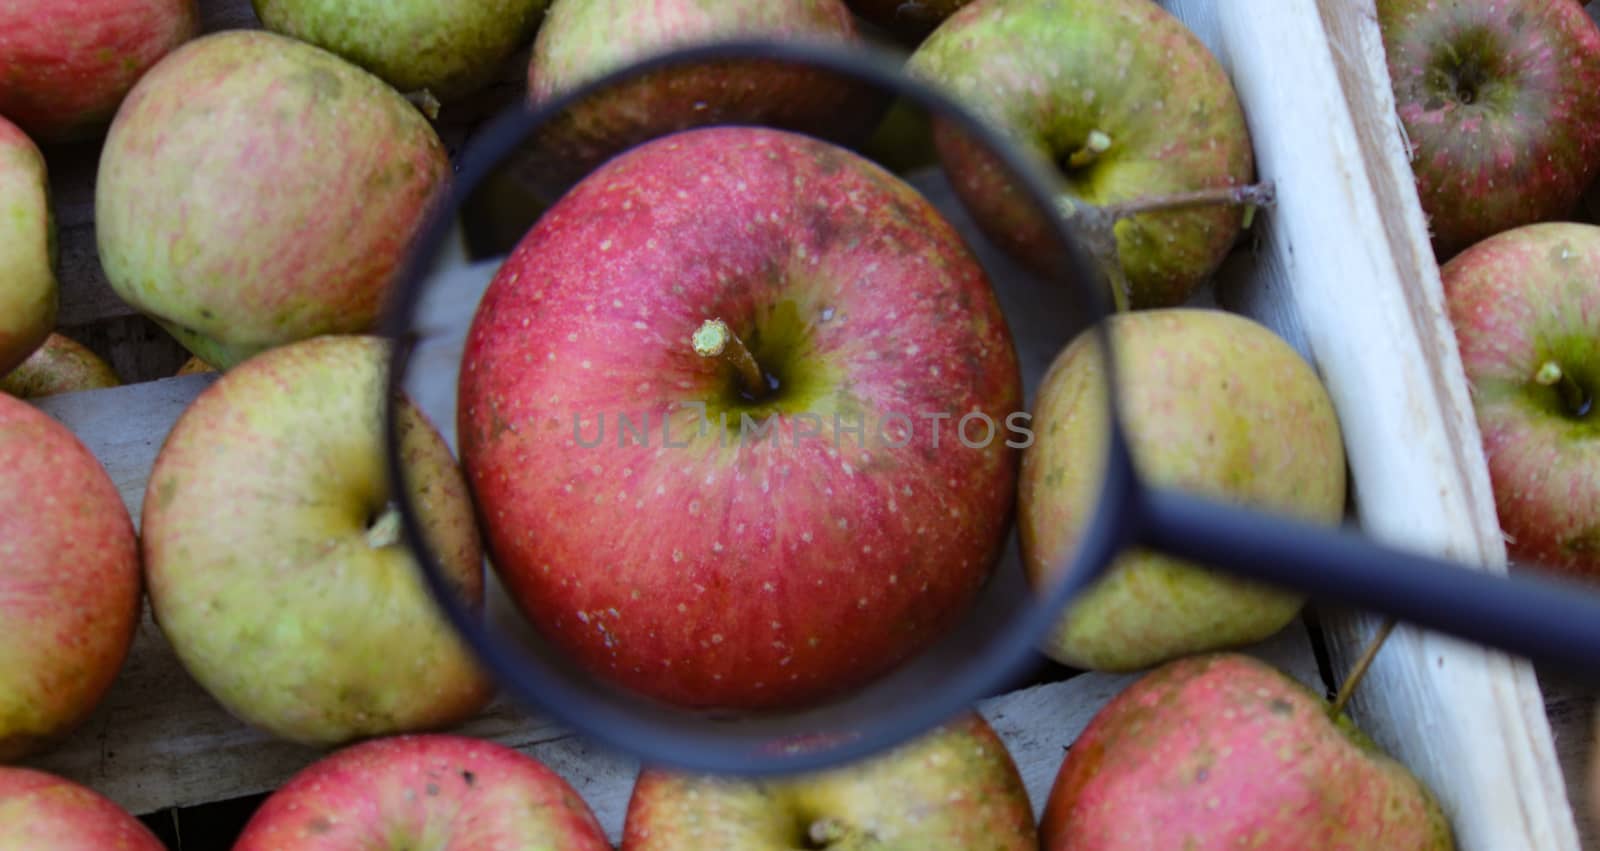 Banner, magnified apples with a magnifying glass. The apples are stacked inside a wooden crate. Zavidovici, Bosnia and Herzegovina.